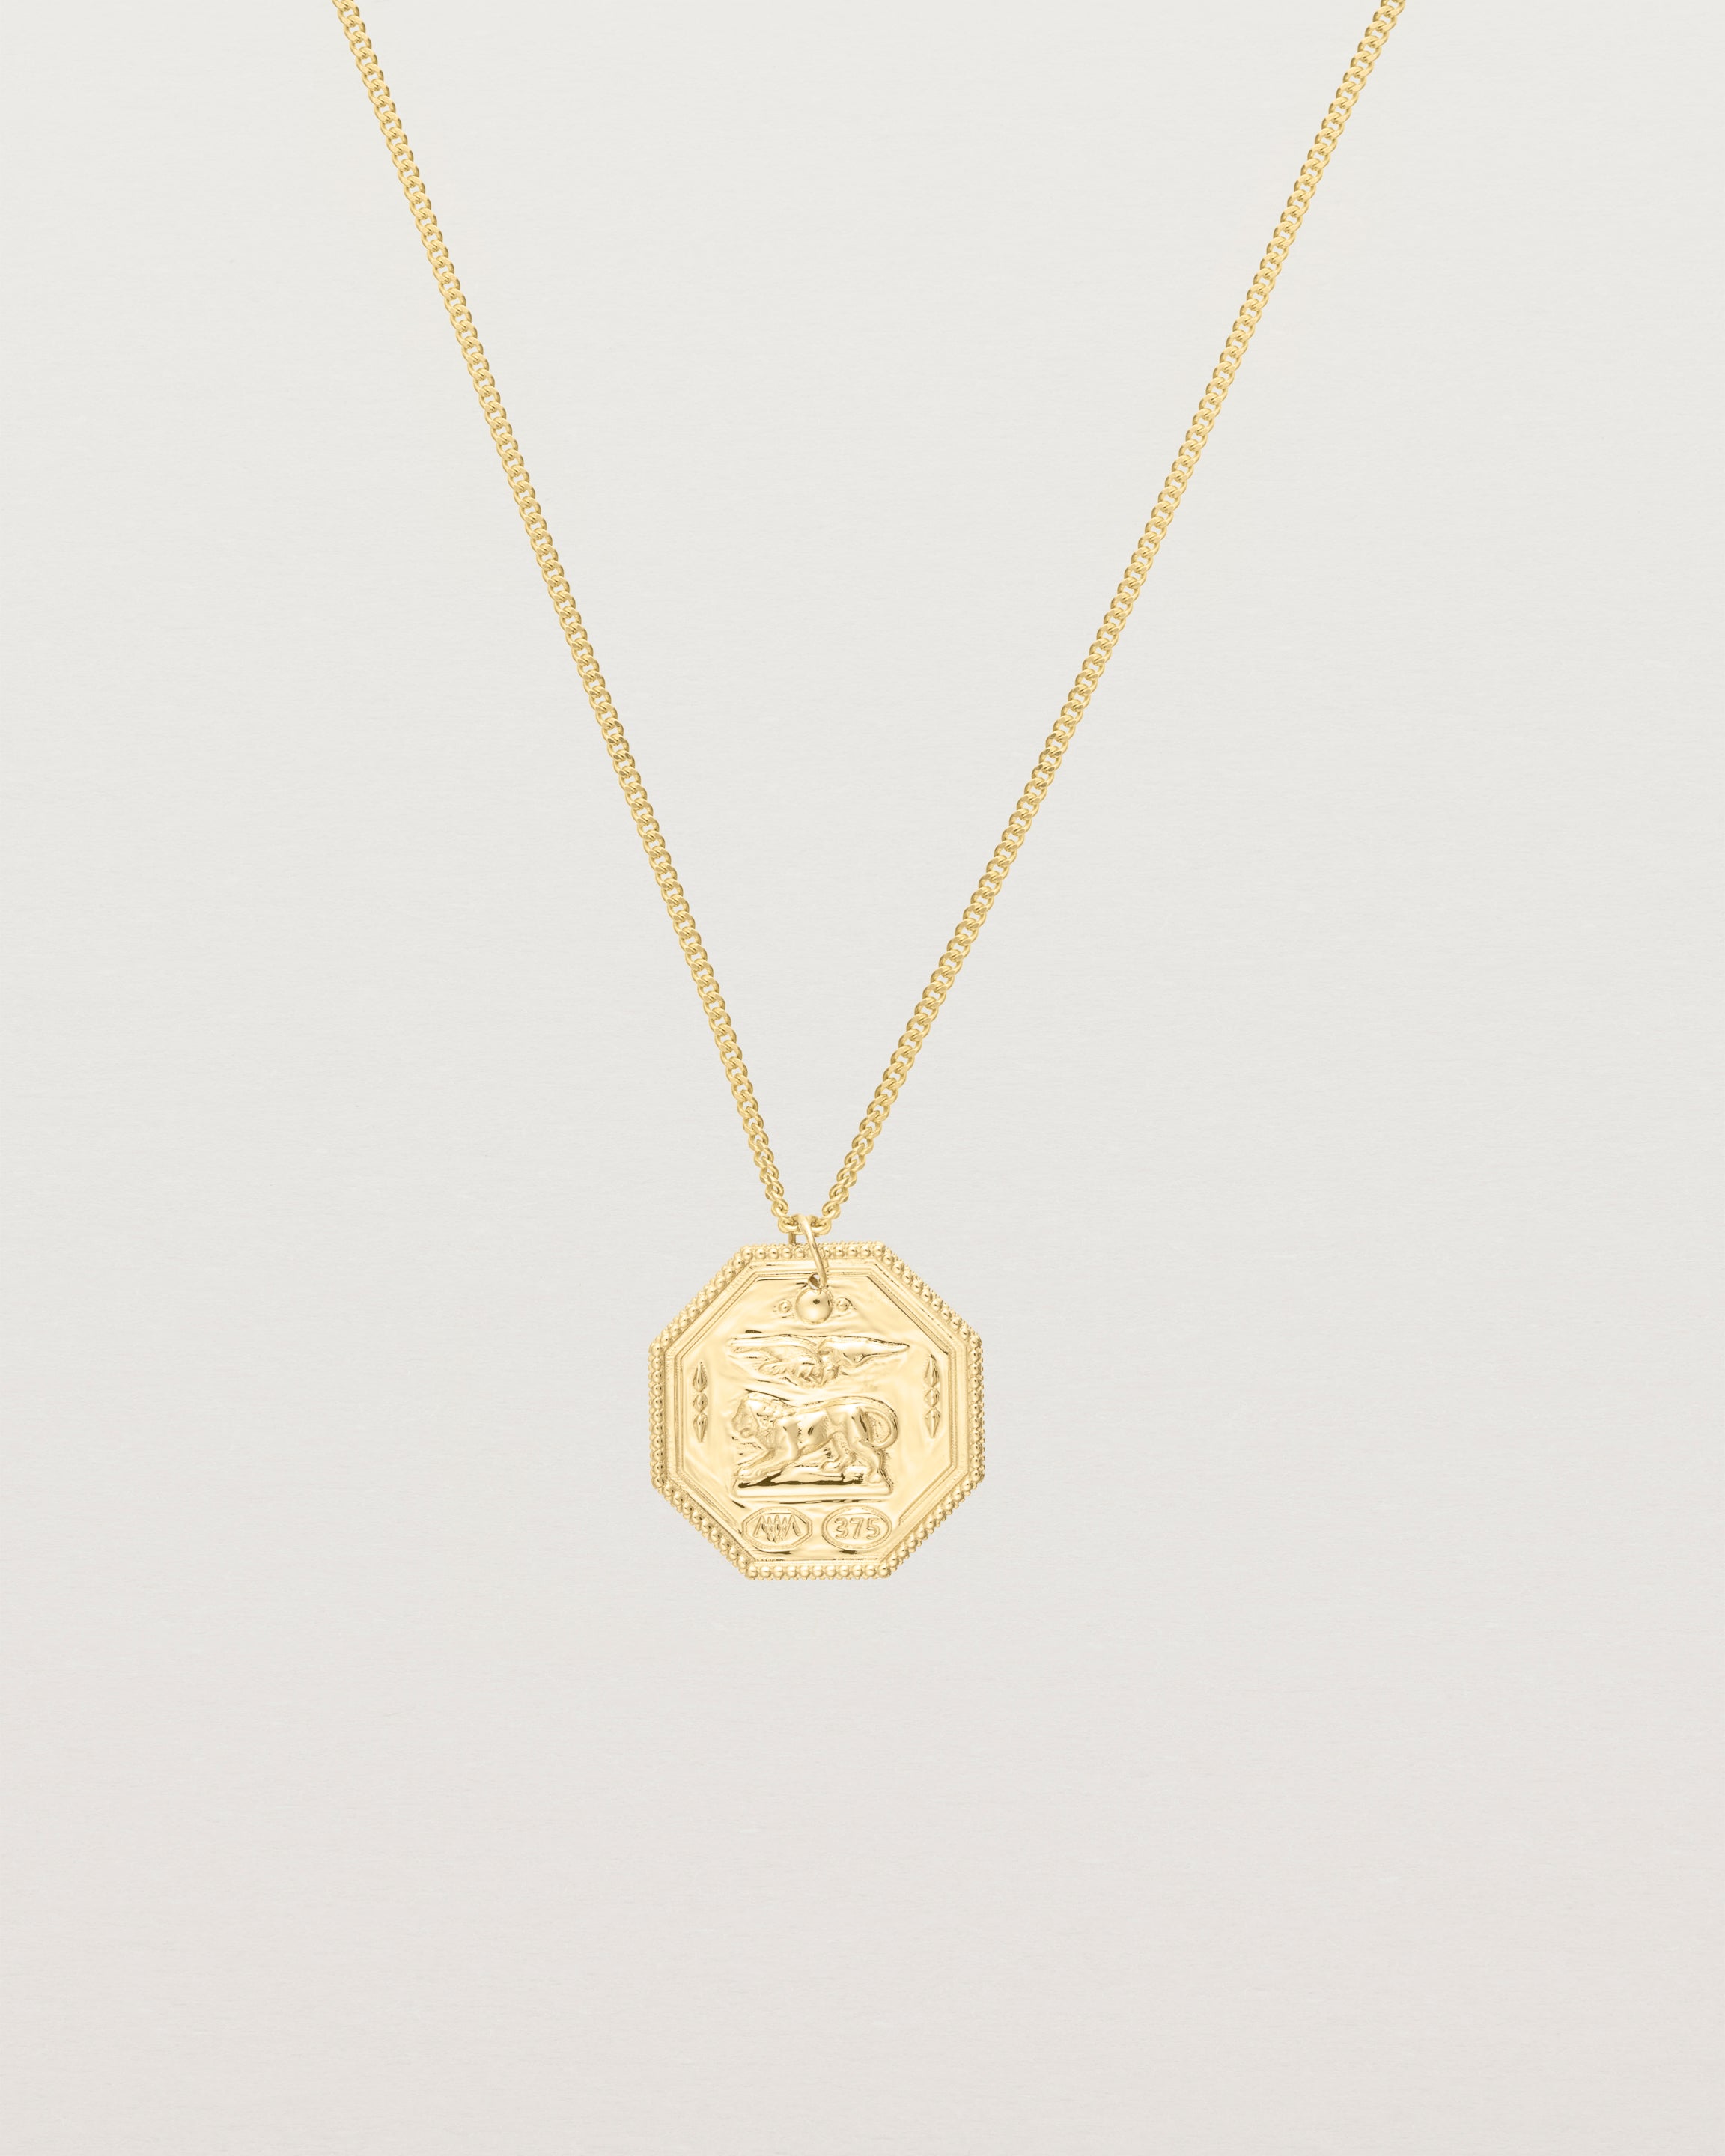 Front view of the Aeneid Necklace in yellow gold.